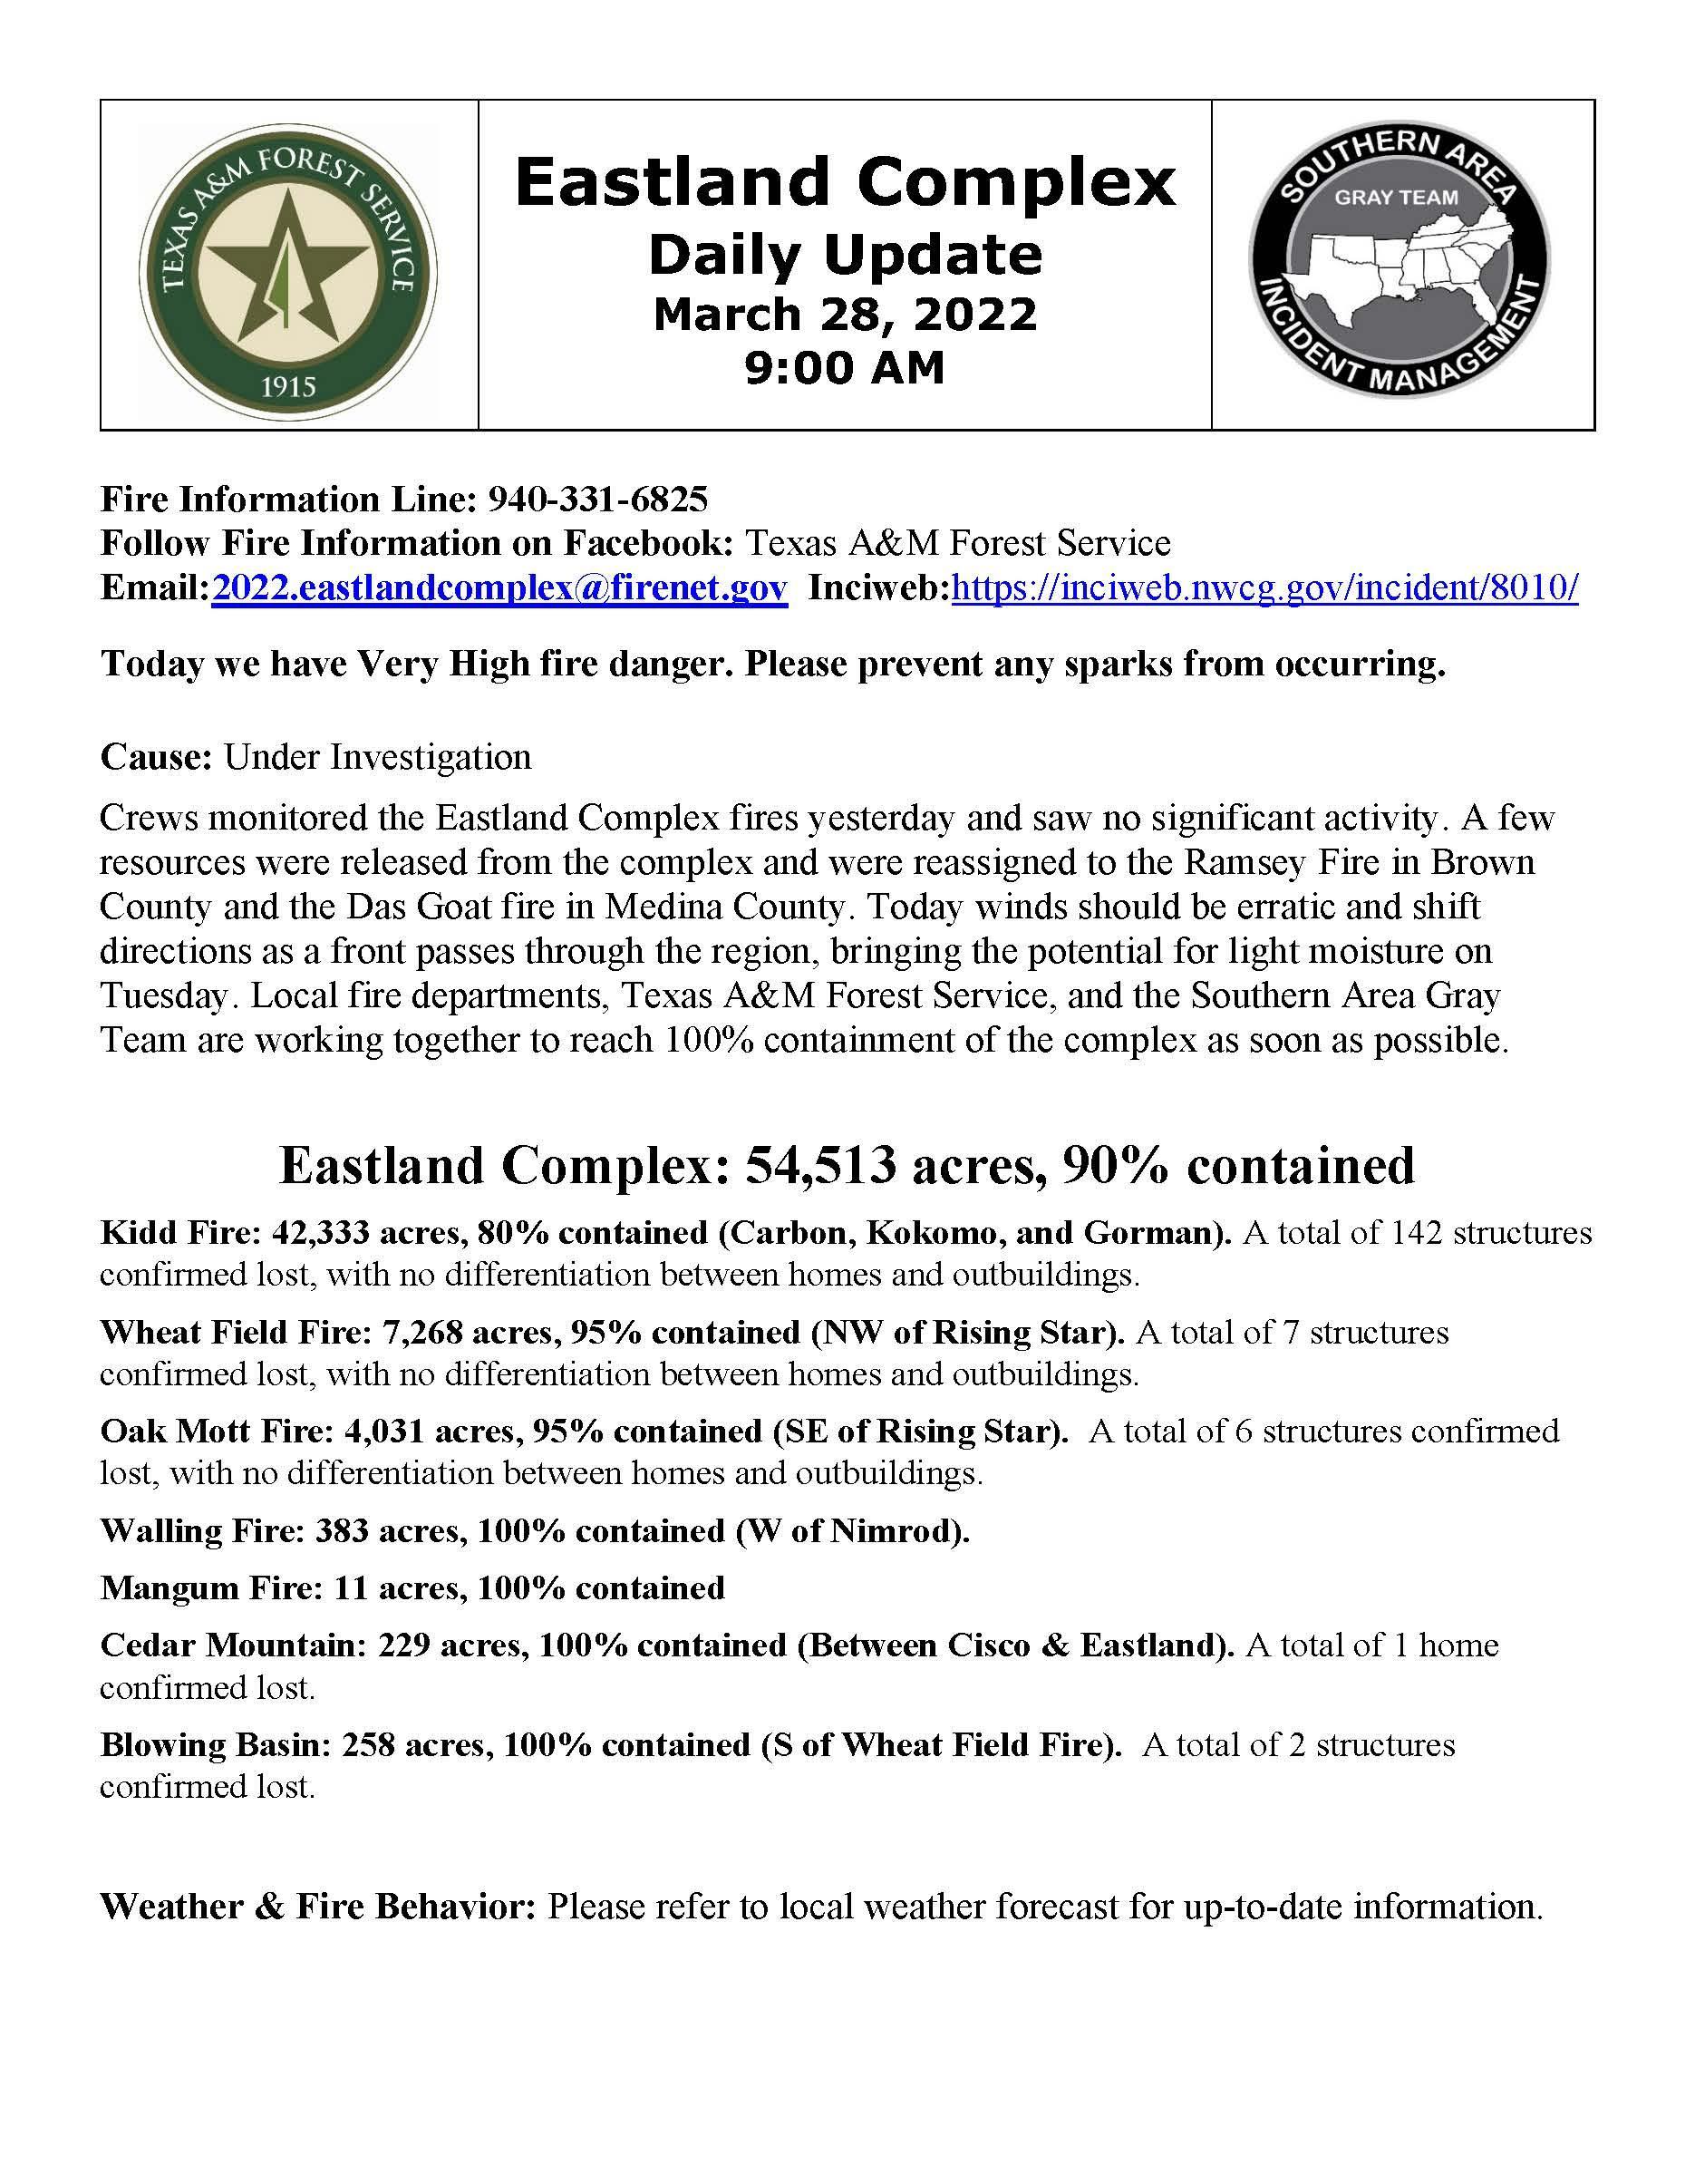 The document contains the March 28 daily update for Eastland Complex fire